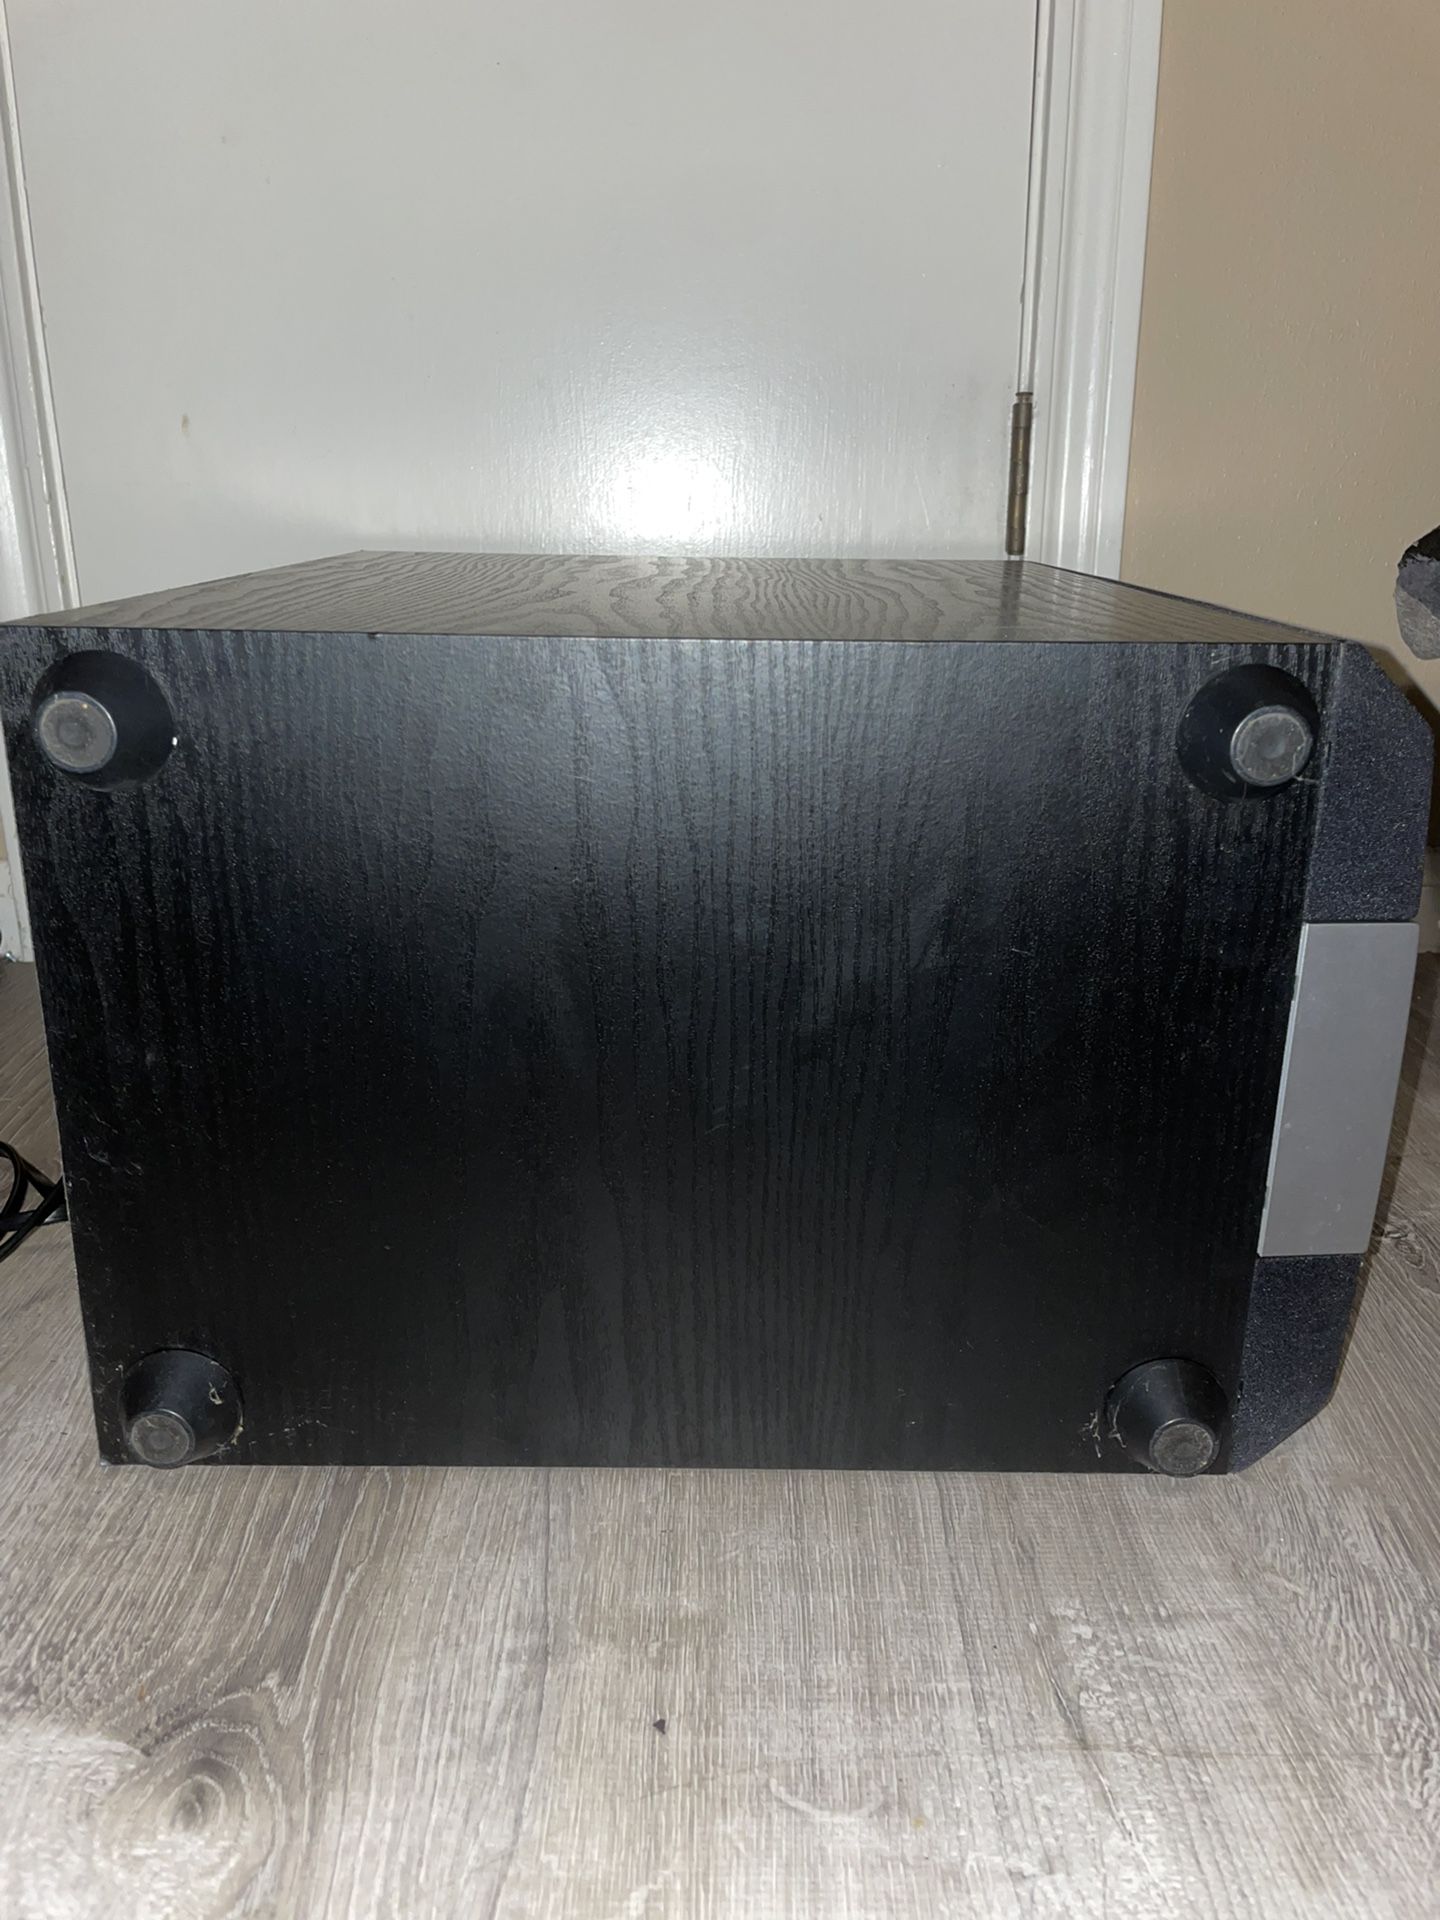 Onkyo SKW-540 Powered Subwoofer Open To Offers! 